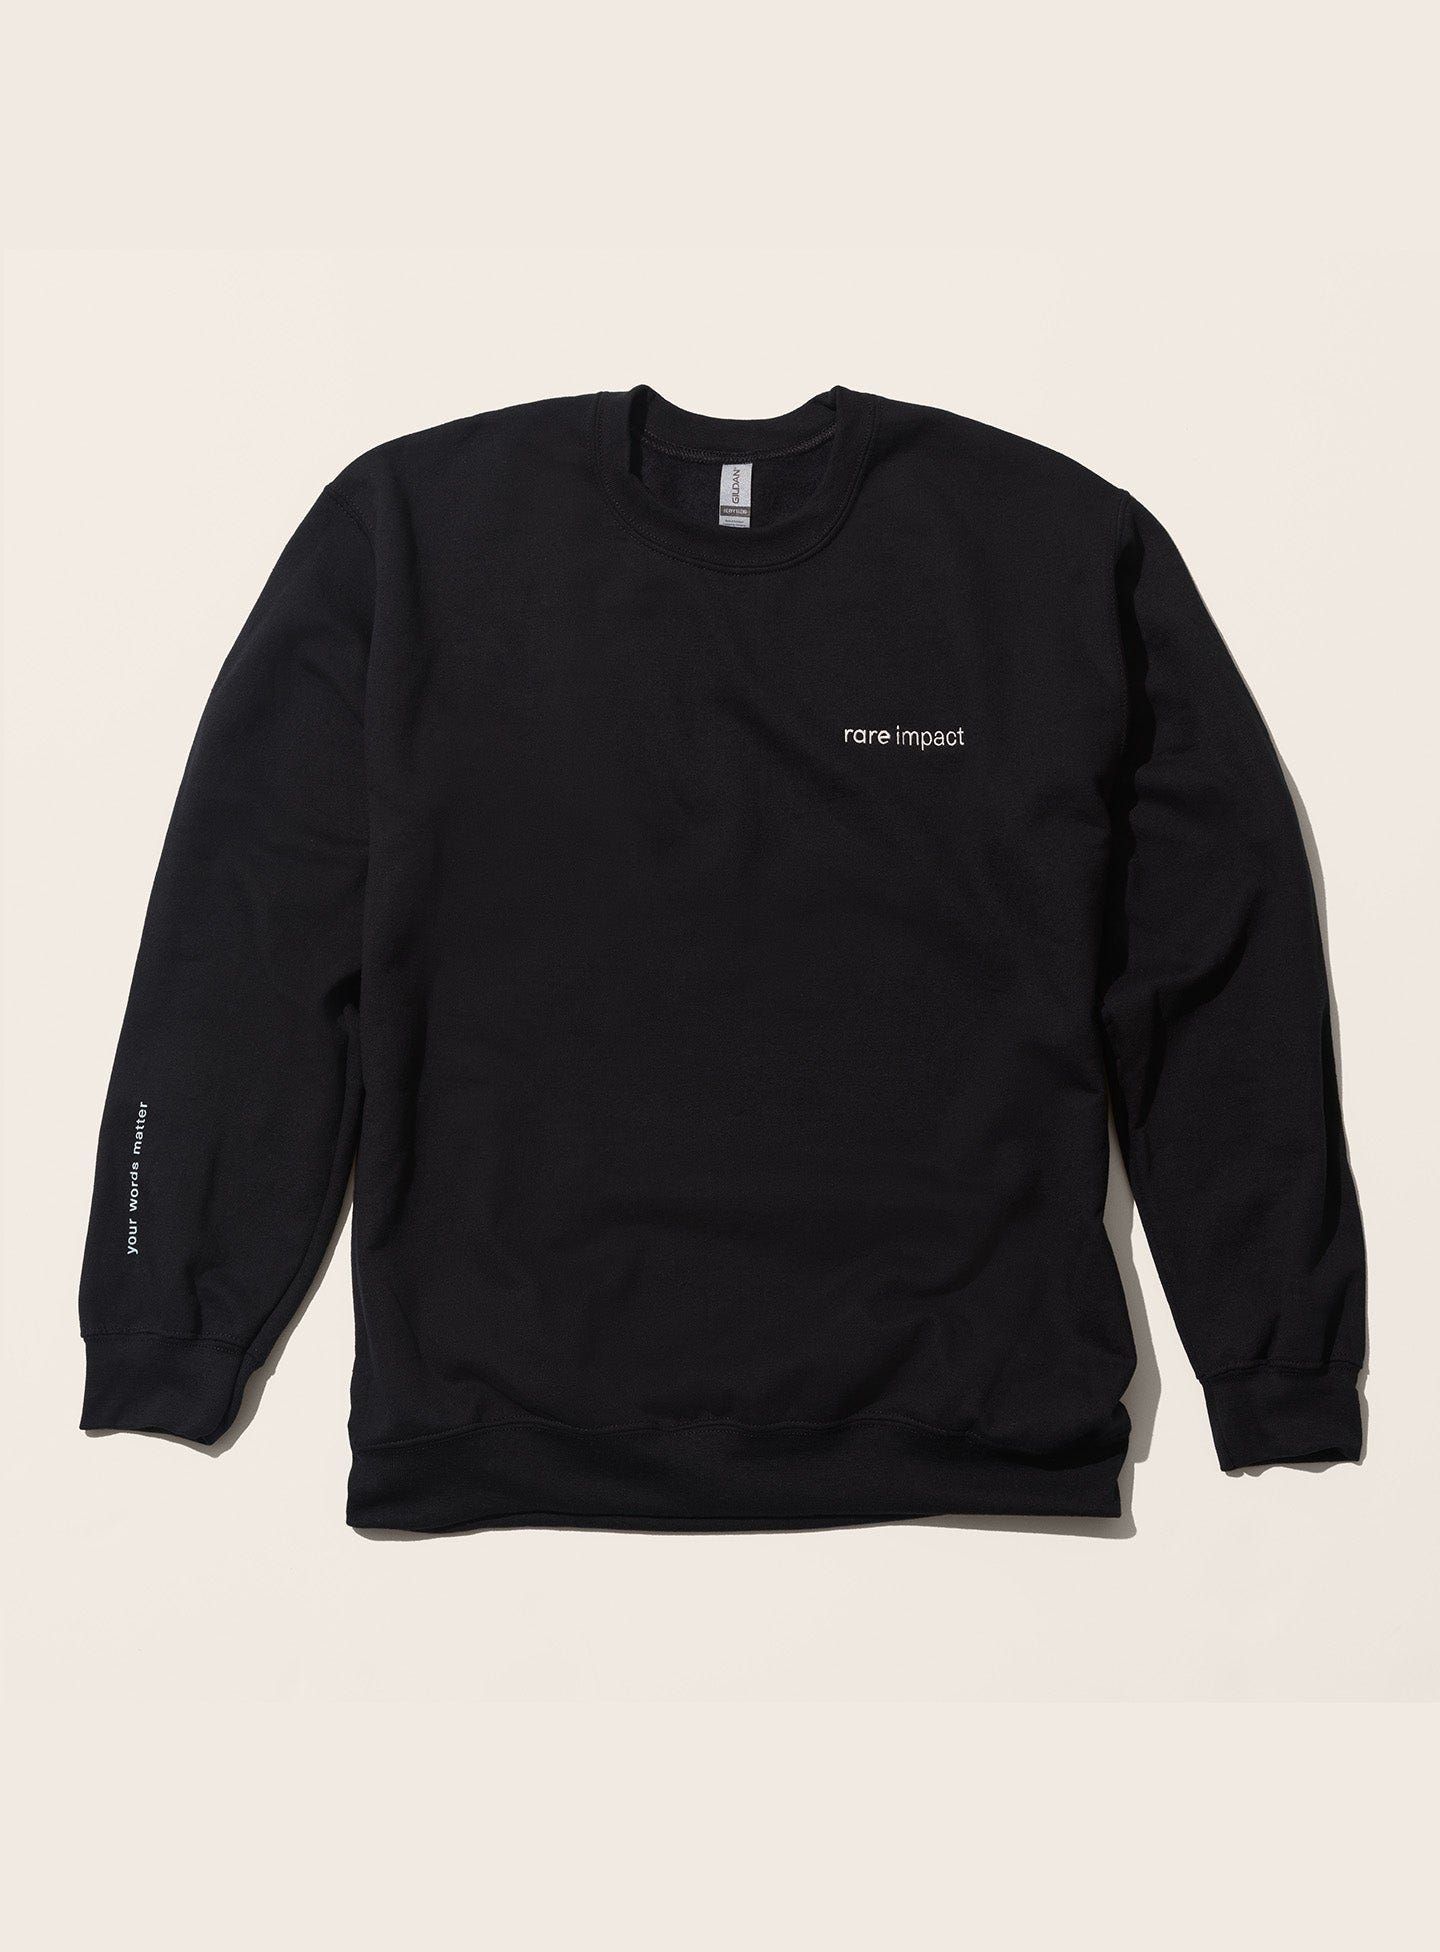 Rare Impact “Your Words Matter” Crewneck – Limited Edition 2022